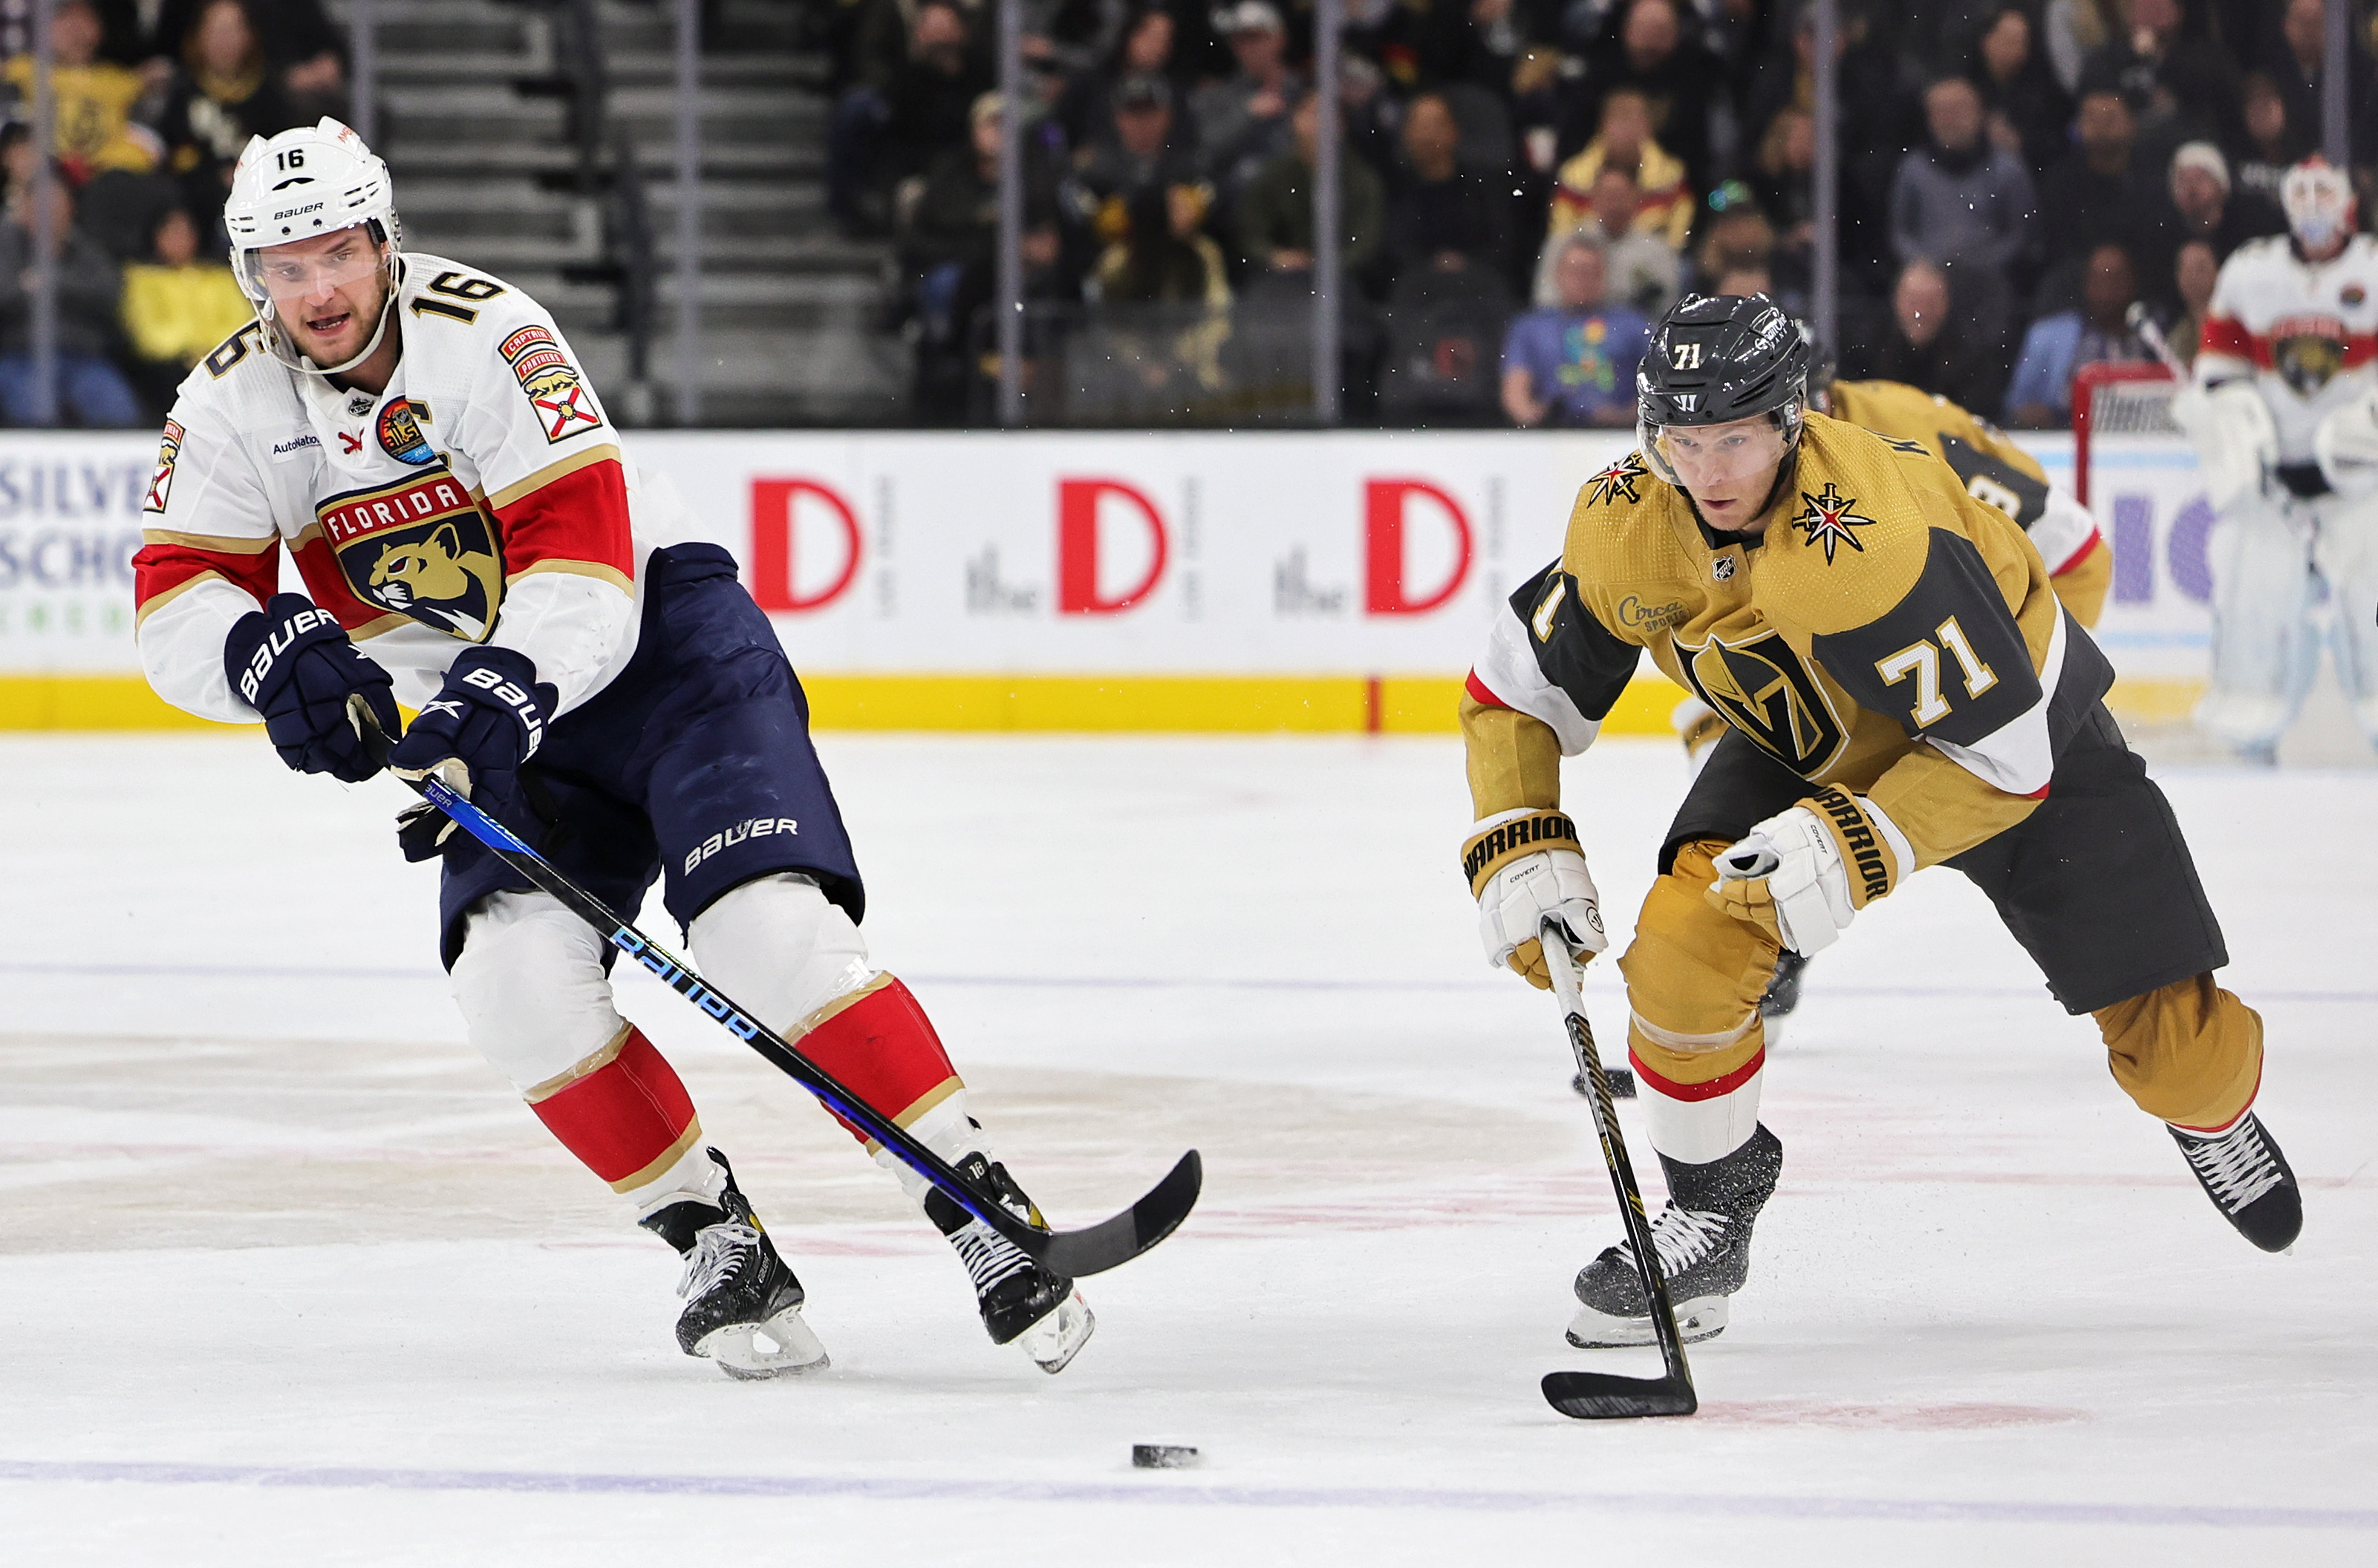 Vegas Golden Knights come back to beat Florida Panthers in Game 1